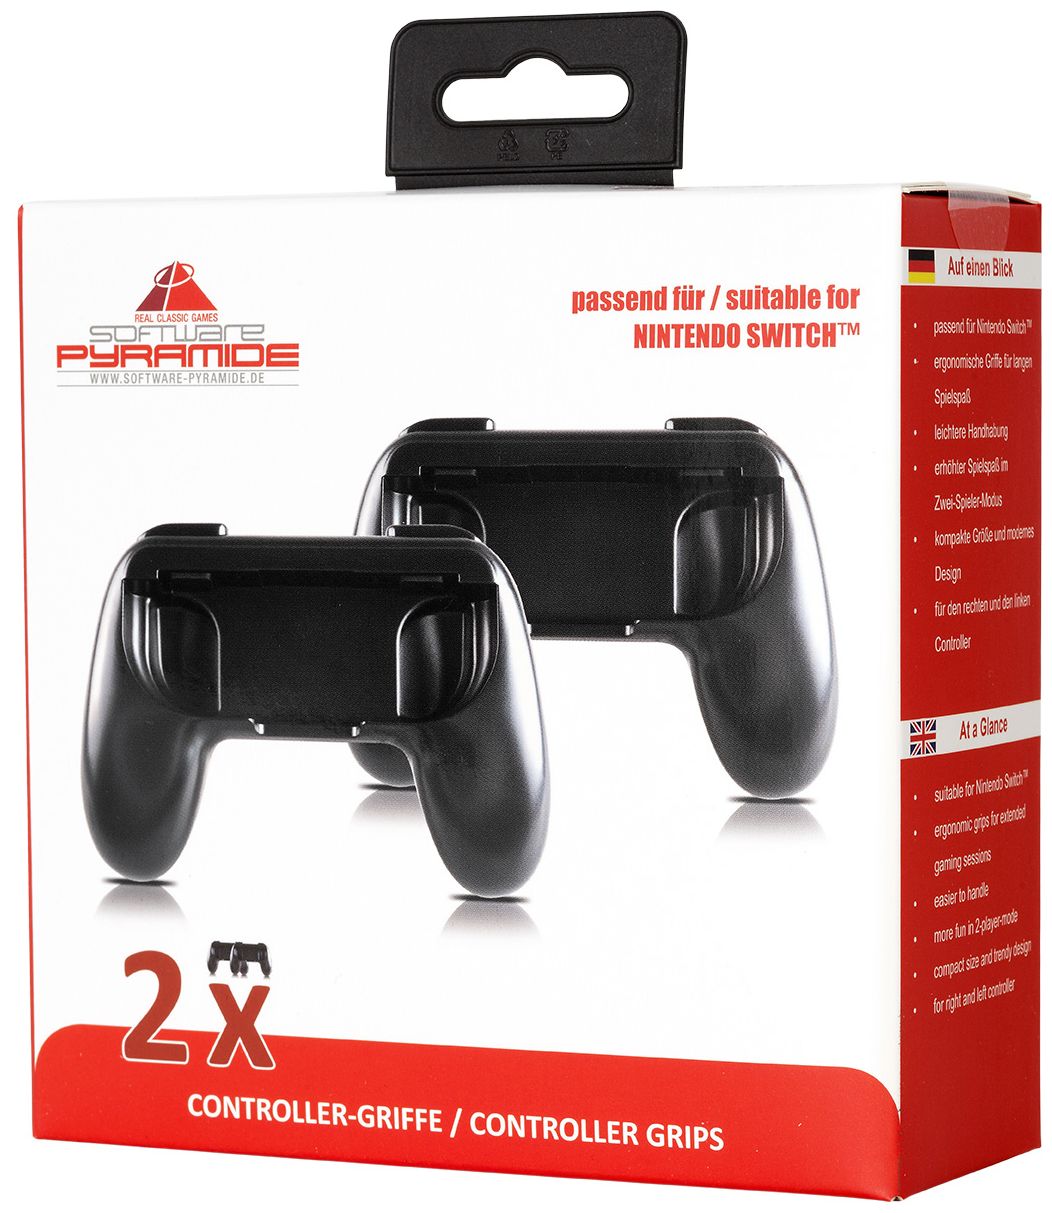 Gaming-Controllerclip Boomstore (Schwarz) Pyramide Doppelpack 97012 Nintendo bei Switch Grip-Kit Software